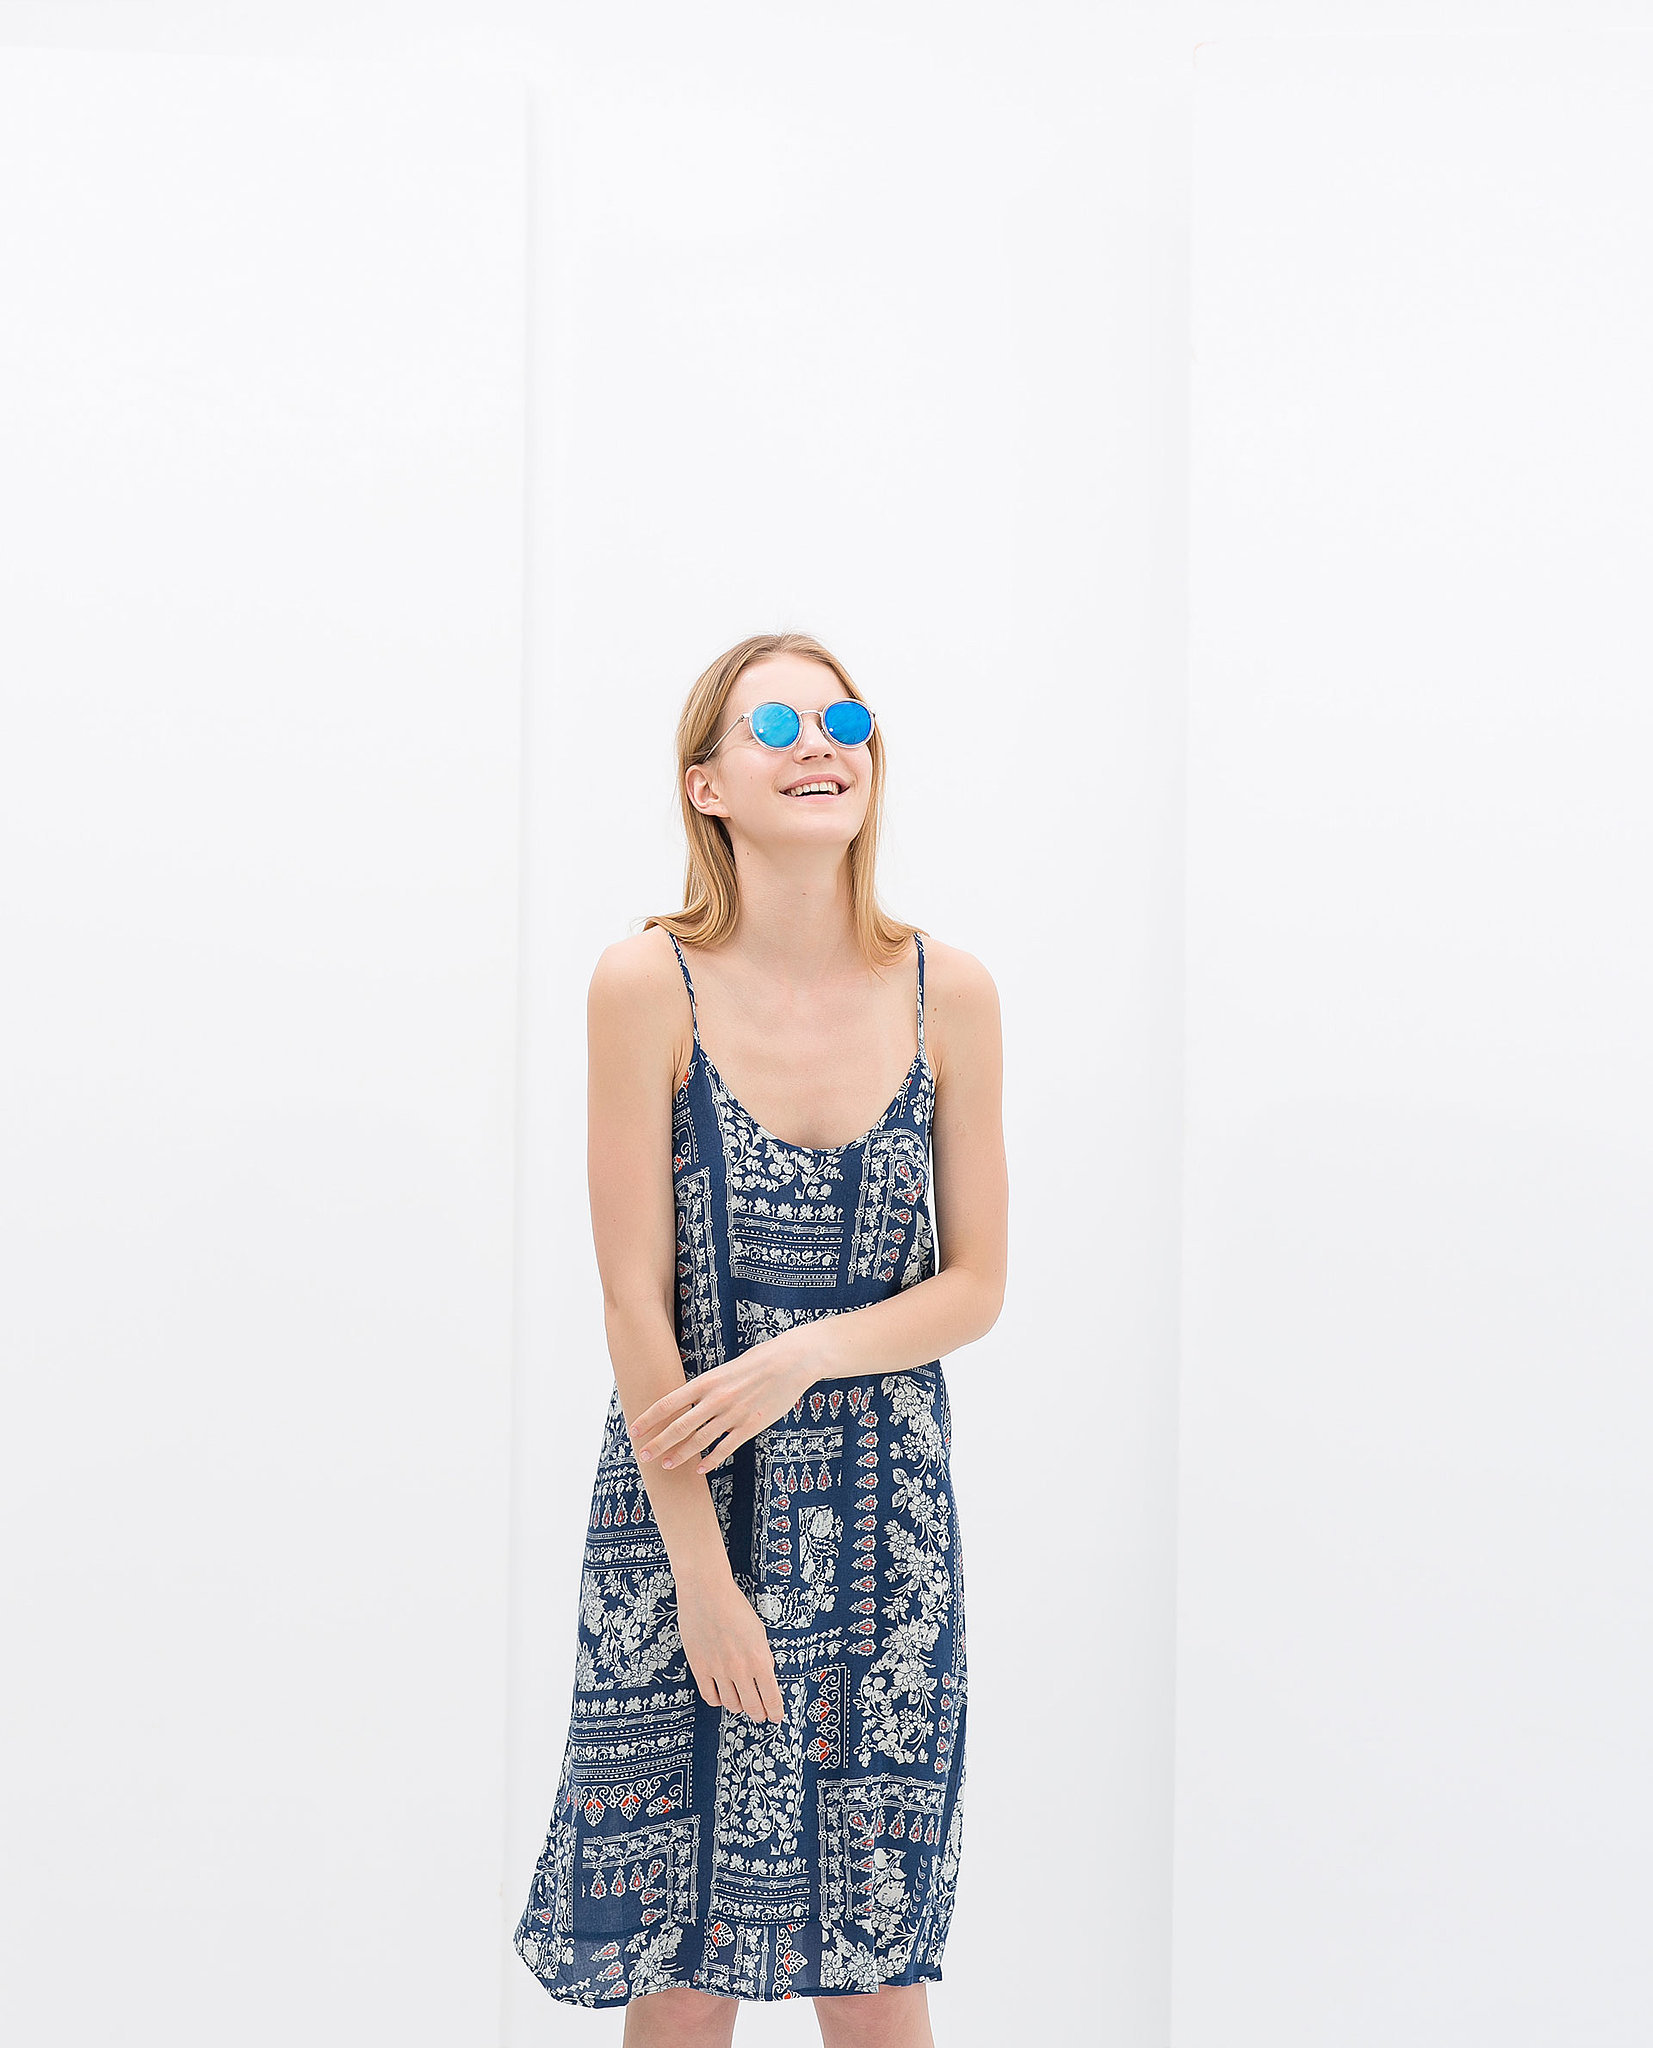 Zara's printed dress (40) might just be the ultimate Summer sundress.